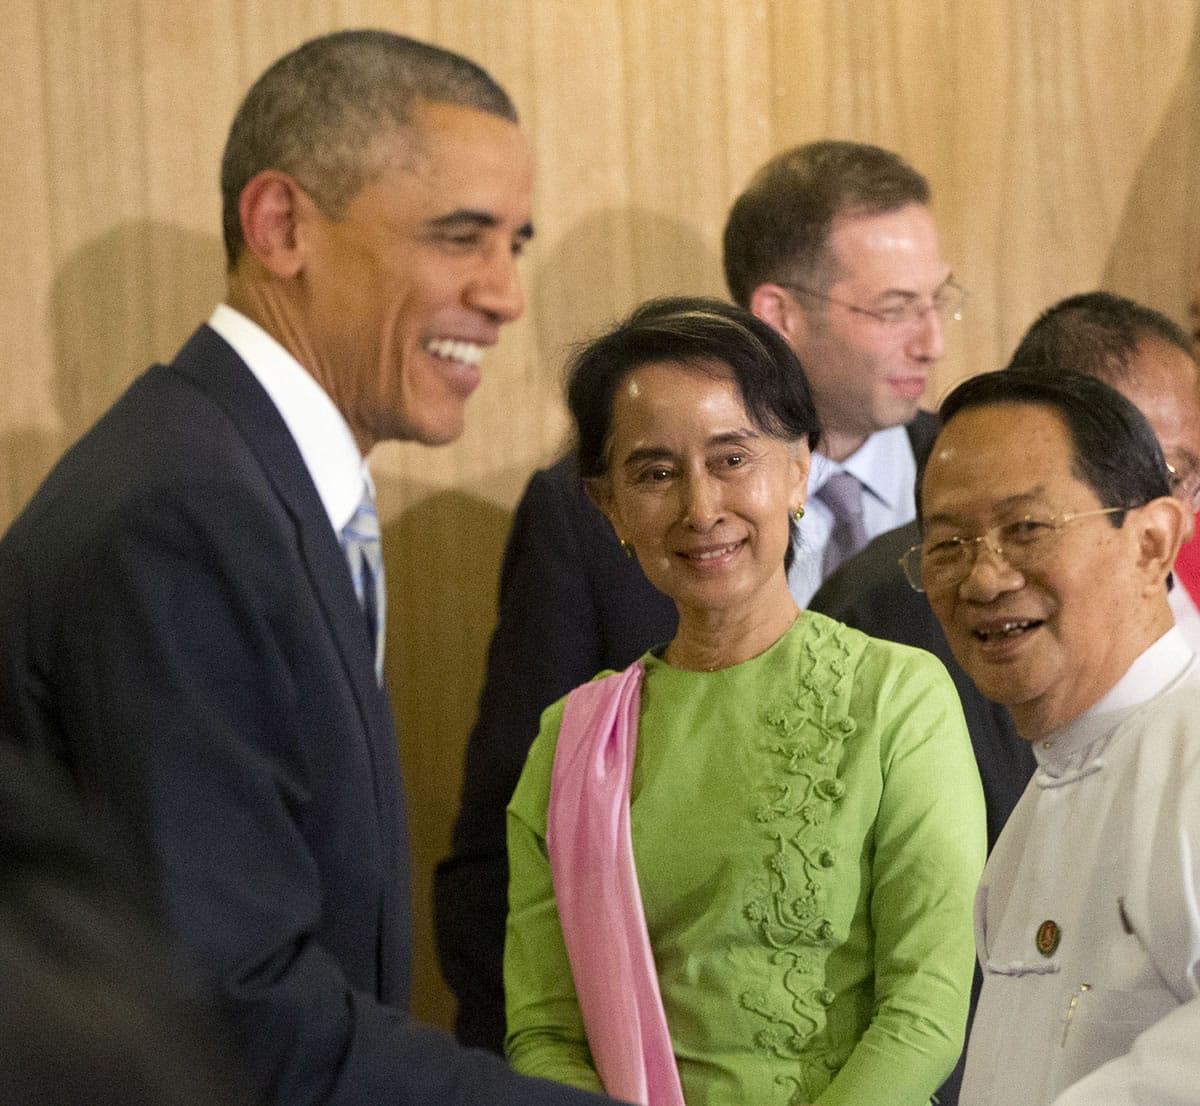 Myanmar's opposition leader Aung San Suu Kyi, center, looks on as President Barack Obama, left, greet participants following a meeting Thursday at Parliamentary Resource Center in Naypyitaw, Myanmar.